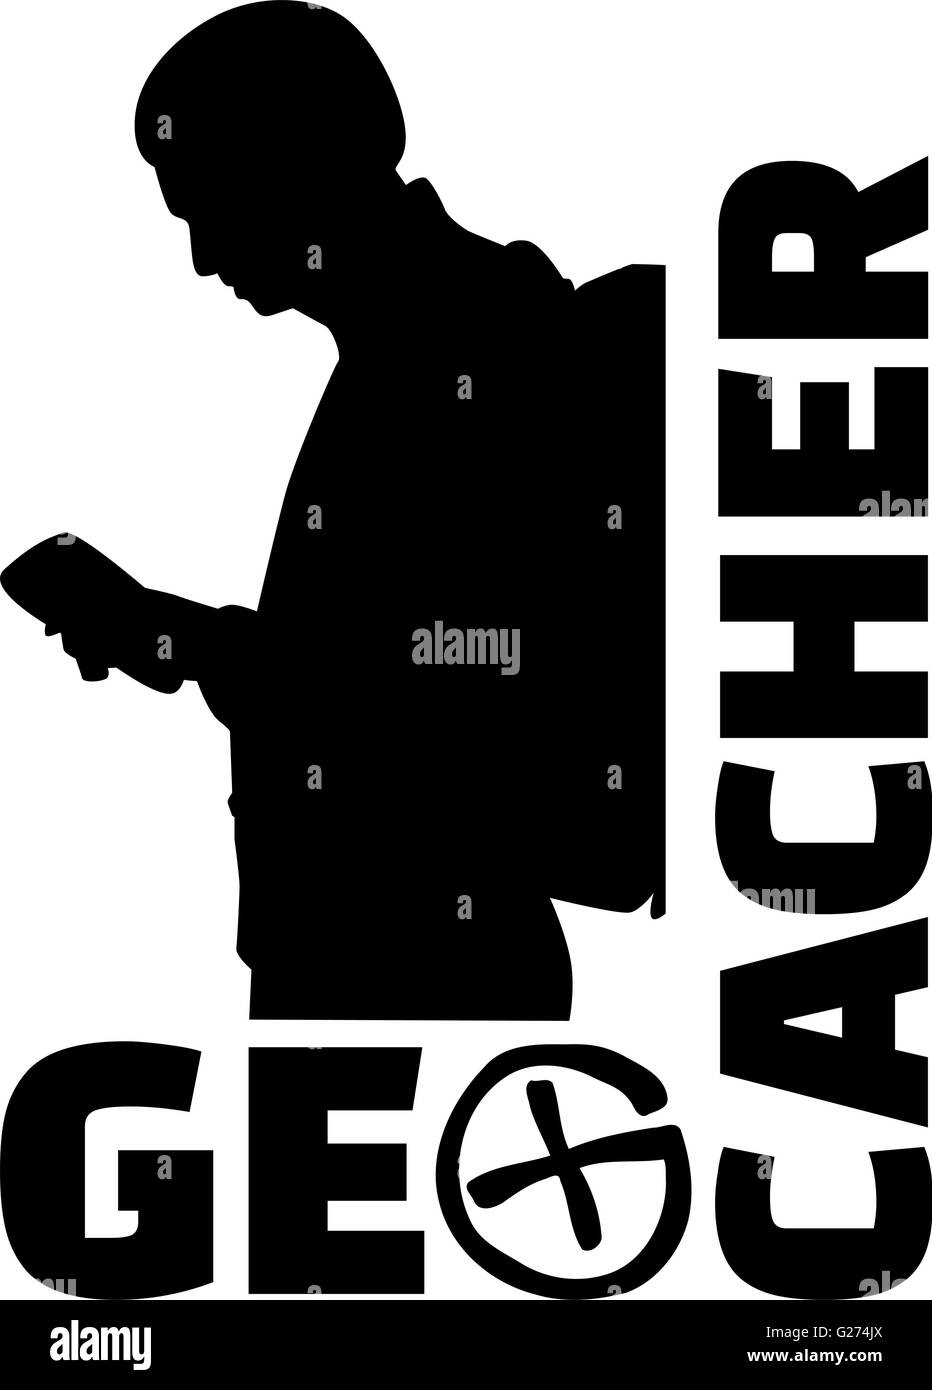 Geocacher word with icon and man Stock Vector